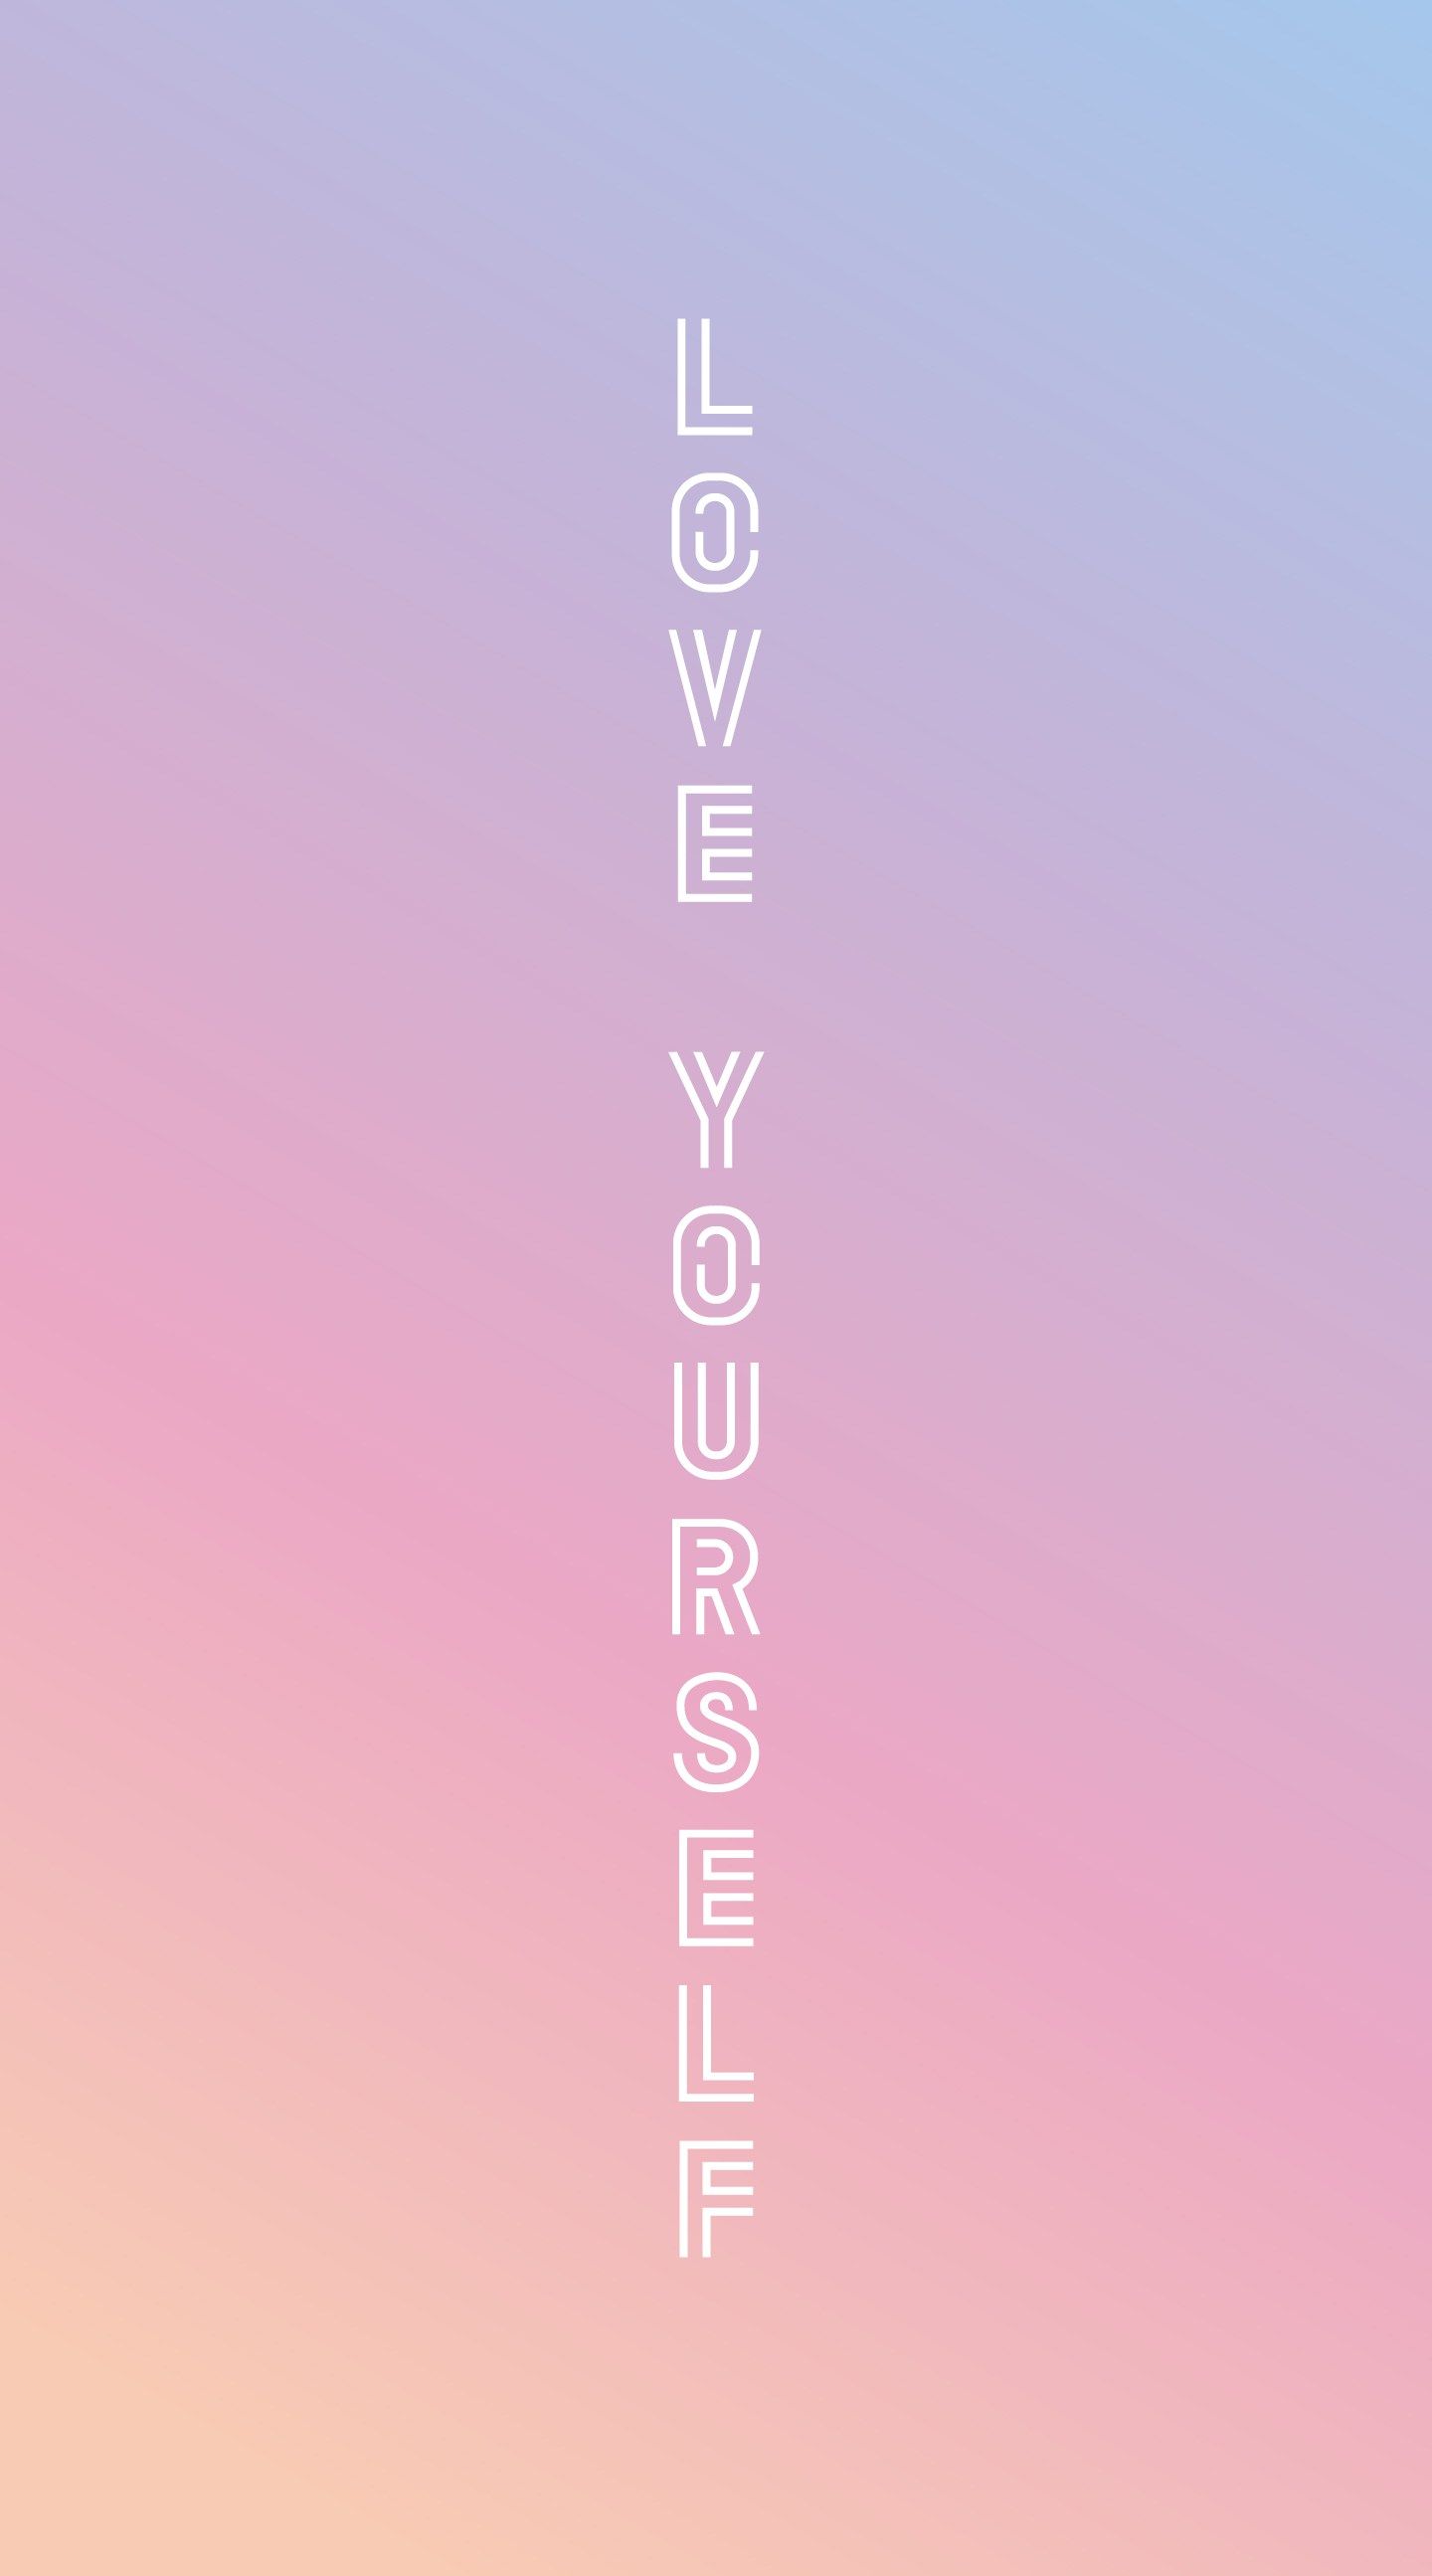 BTS Love Yourself iPhone Wallpapers on WallpaperDog